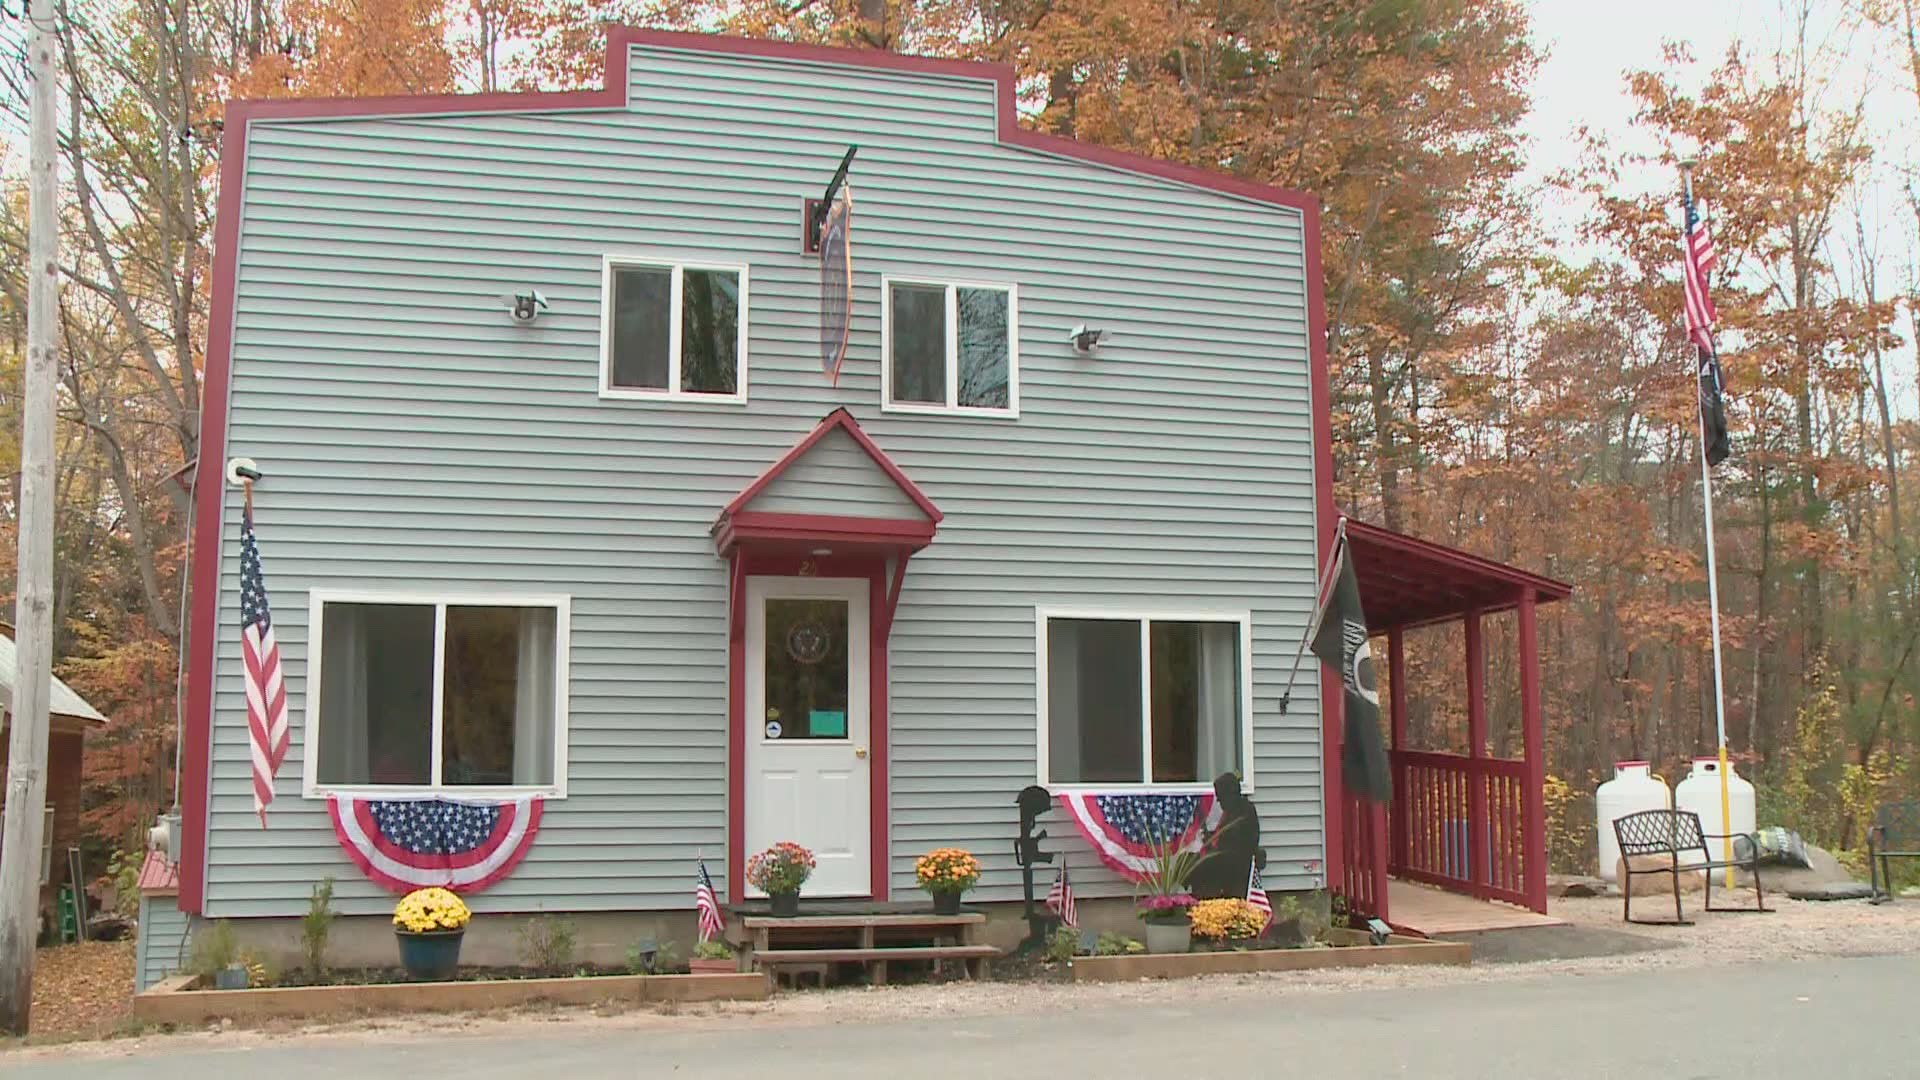 The American Legion Post 67 is about to open it's doors for the first time after sitting abandoned filled with trash for more than a dozen years.